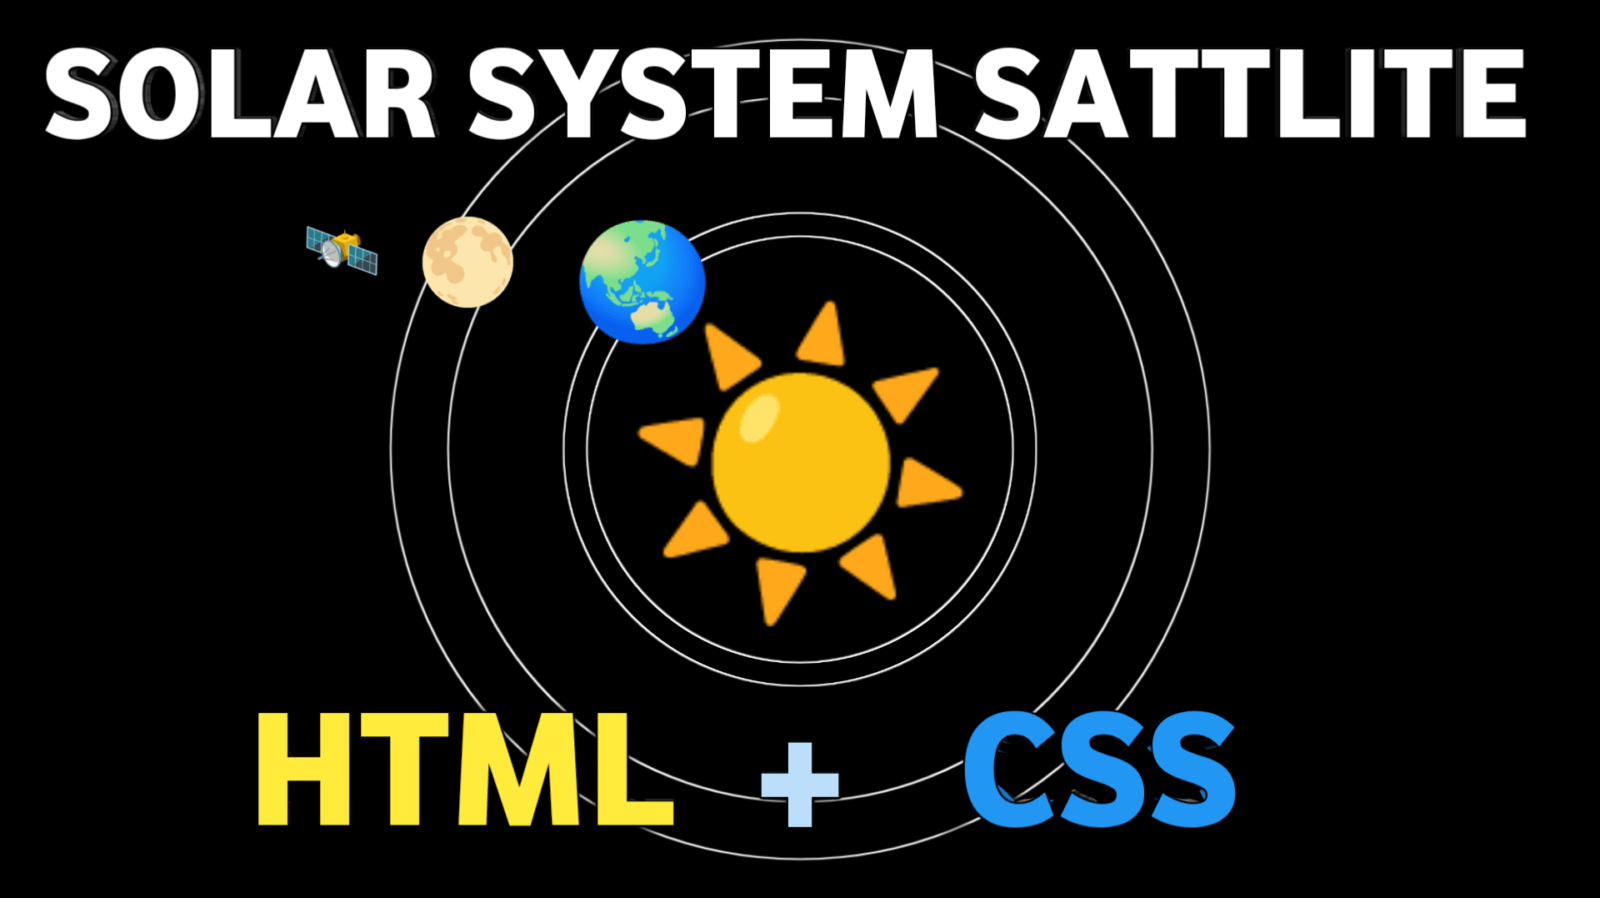 HTML5 and CSS3: The Key to Your Solar System’s Success 🛸🌎°🌓•　.°•🚀 ★　*　°　🛰 　°